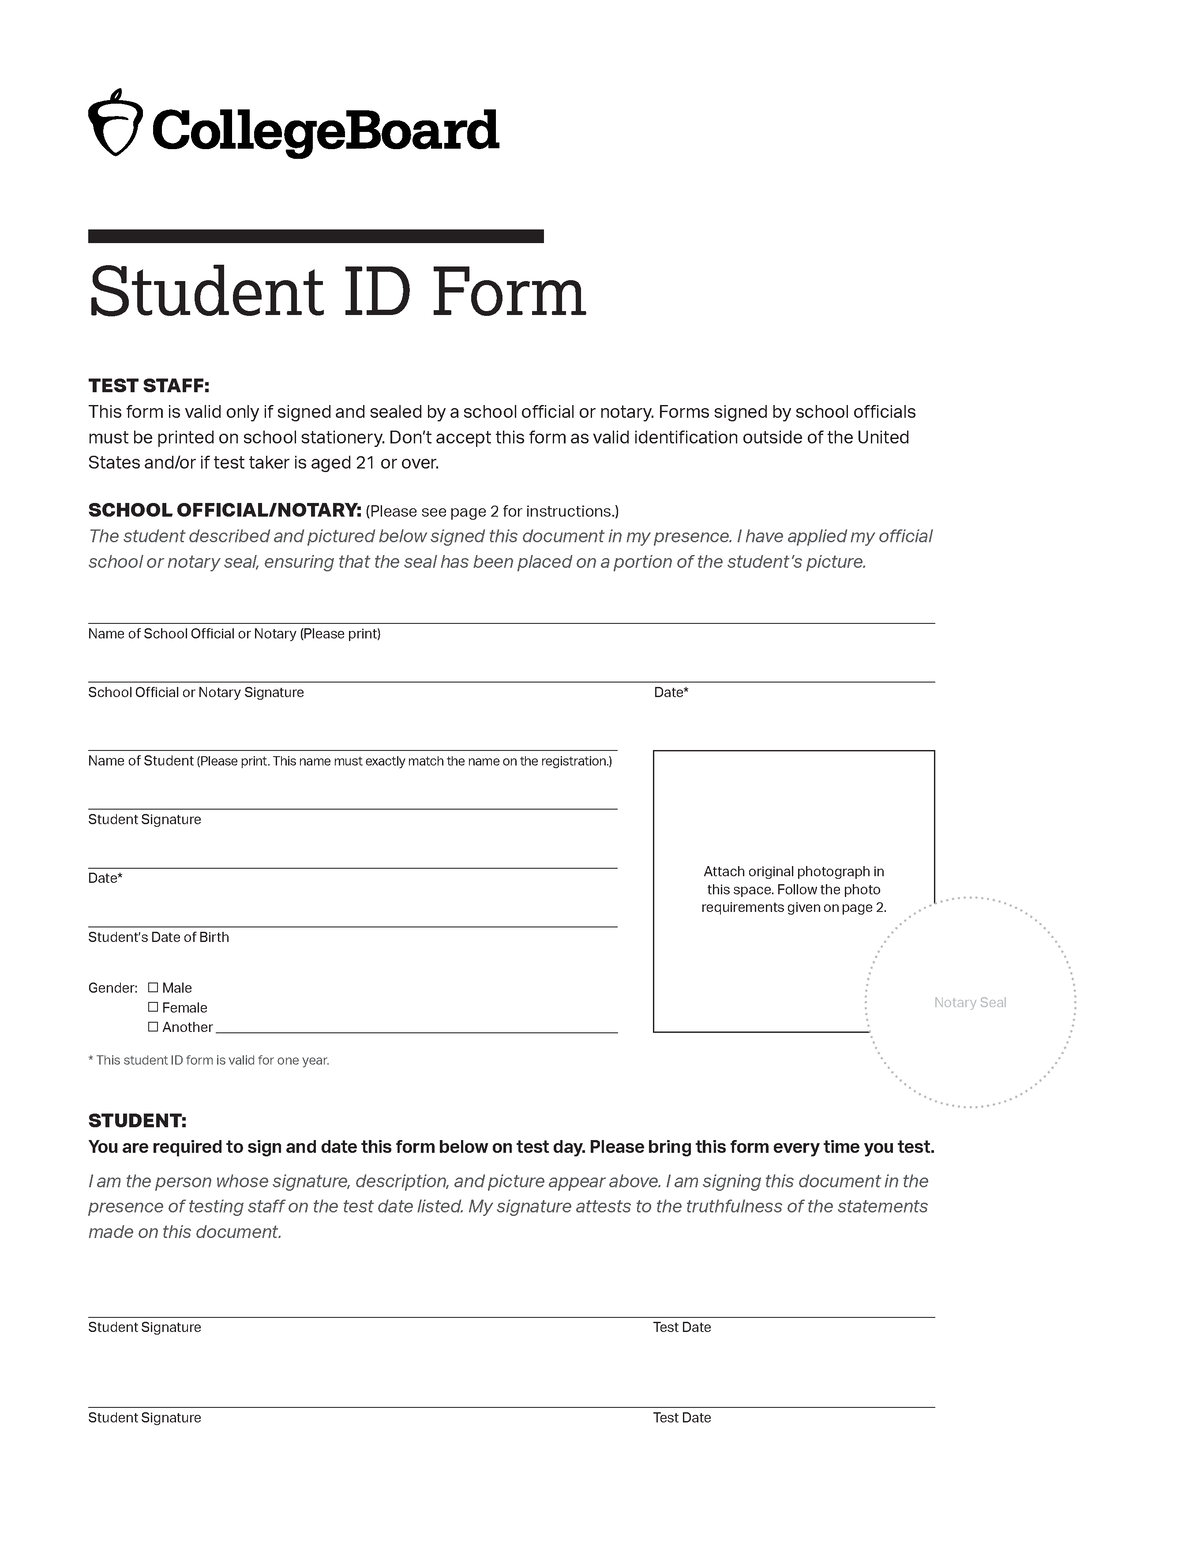 21 22 SAT Student ID Form Student ID Form TEST STAFF This Form Is 